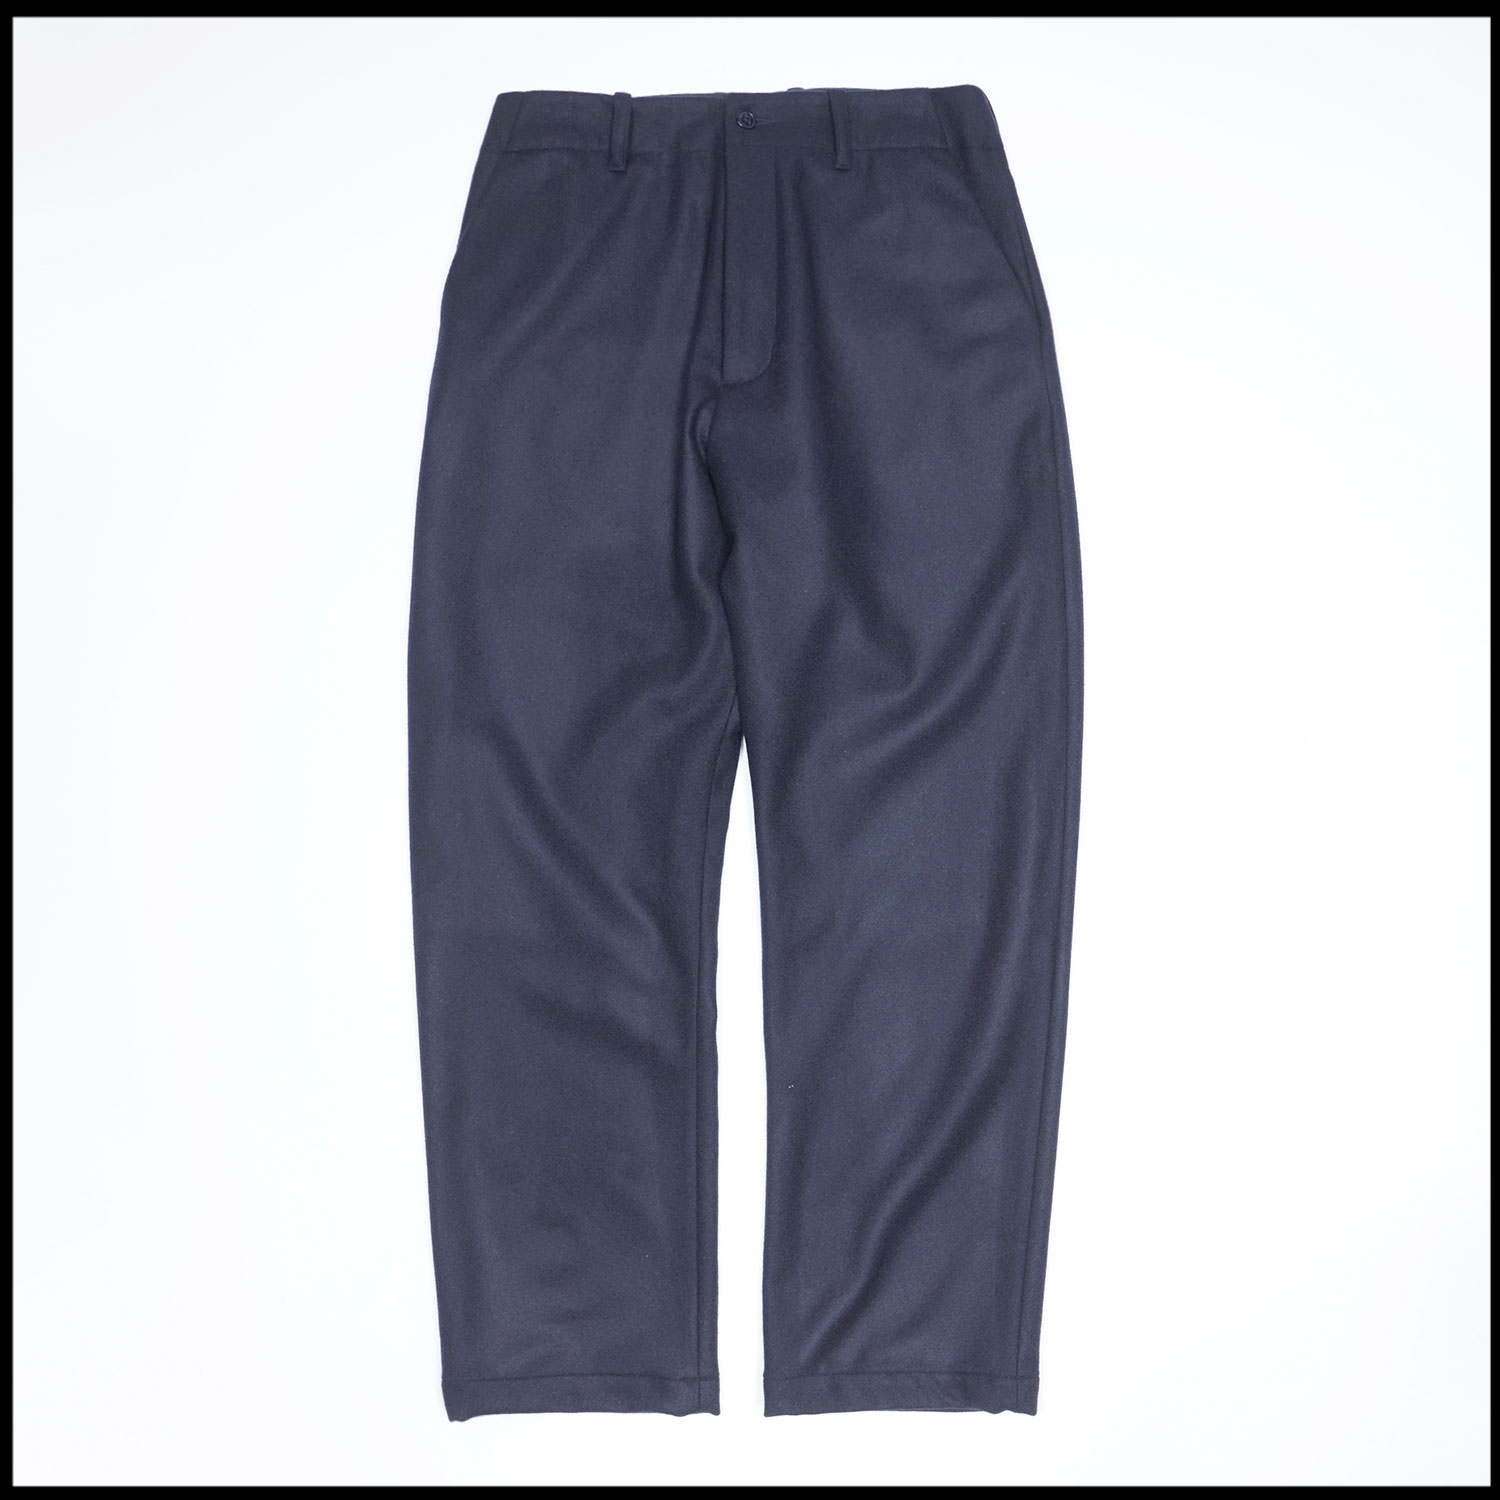 FOX Pants in Midnight blue color by Arpenteur